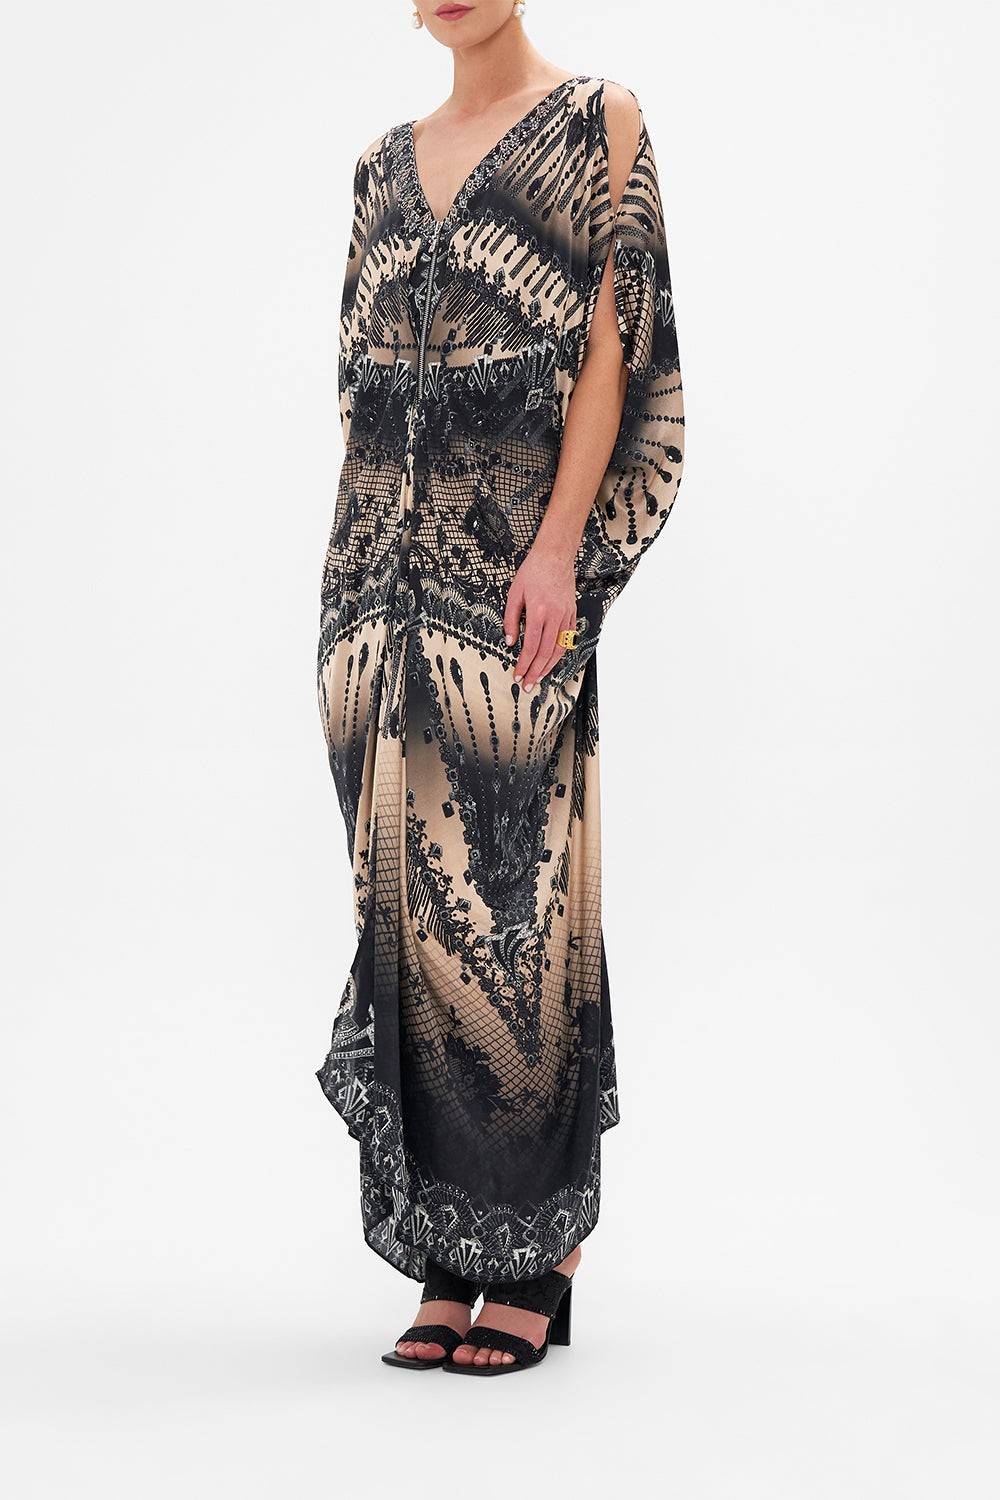 LONG DRAPE DRESS WITH ZIP FRONT CURTAIN CALL CHAOS